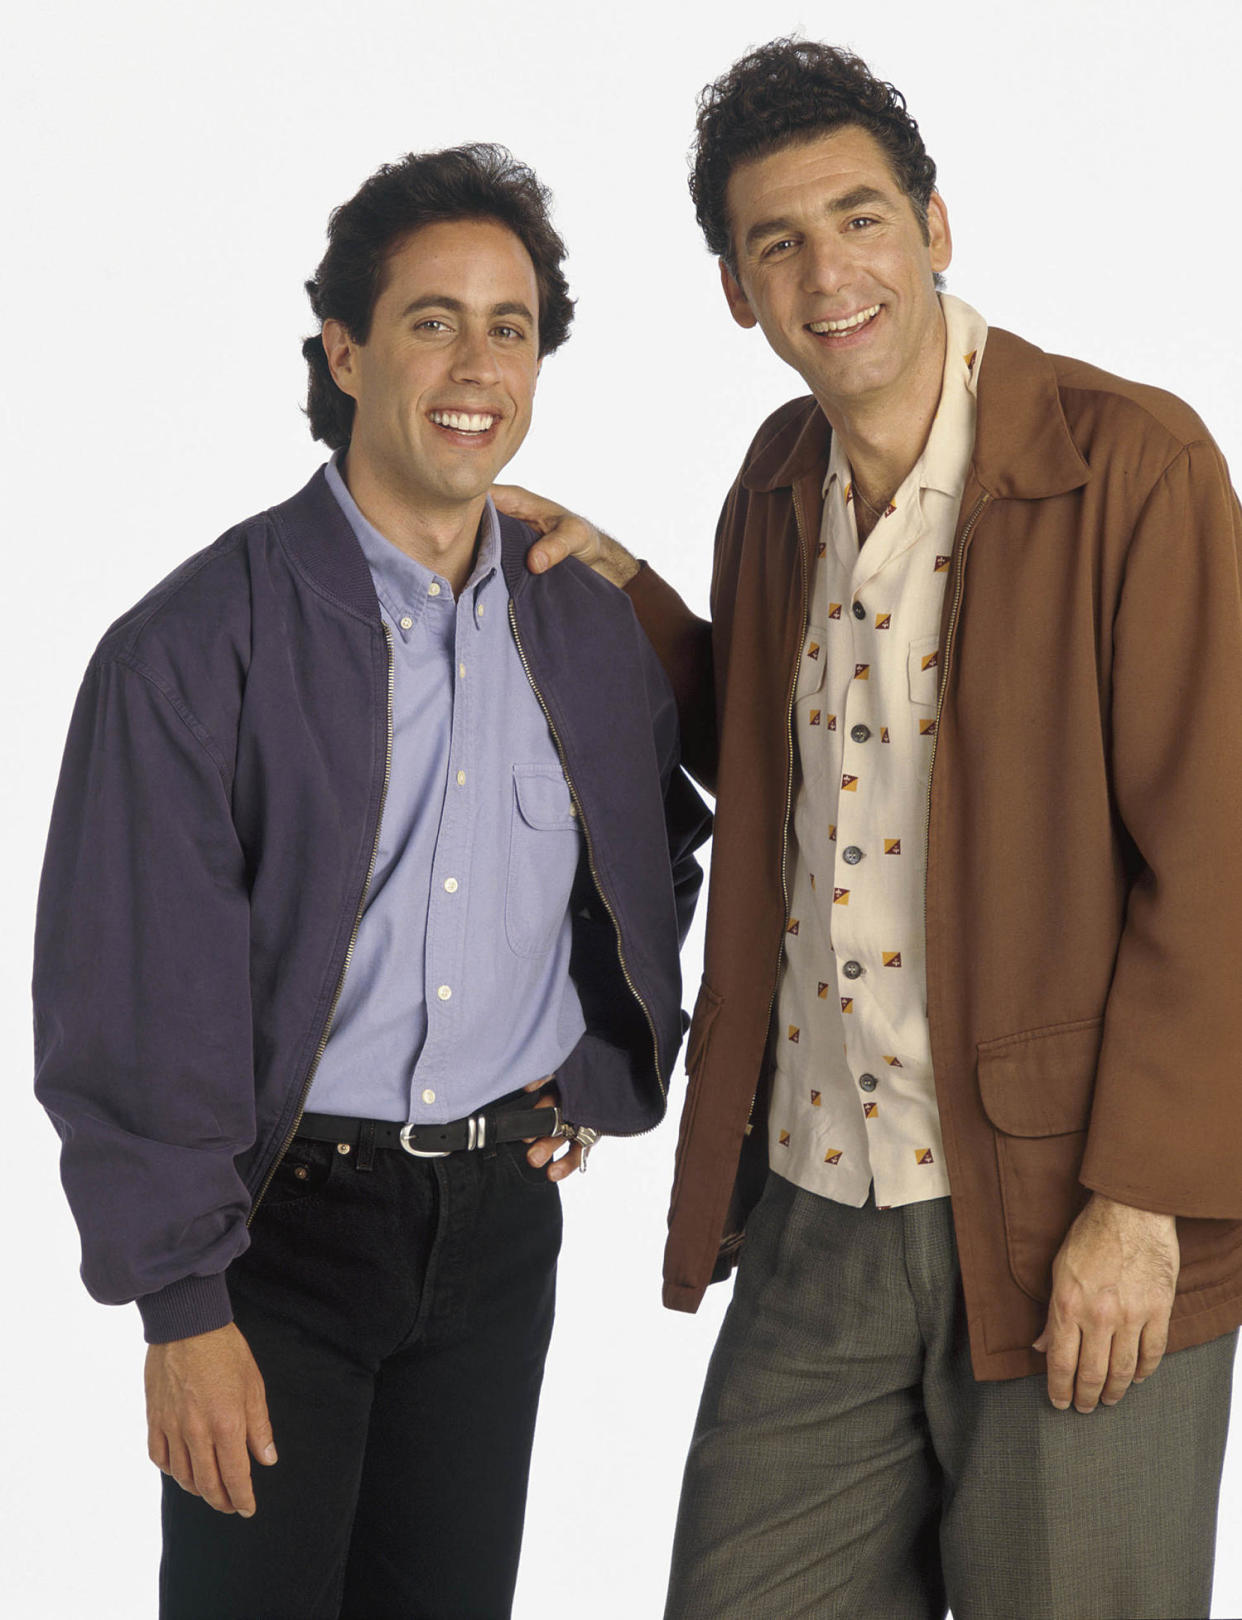 Jerry Seinfeld and Michael Richards (NBC)